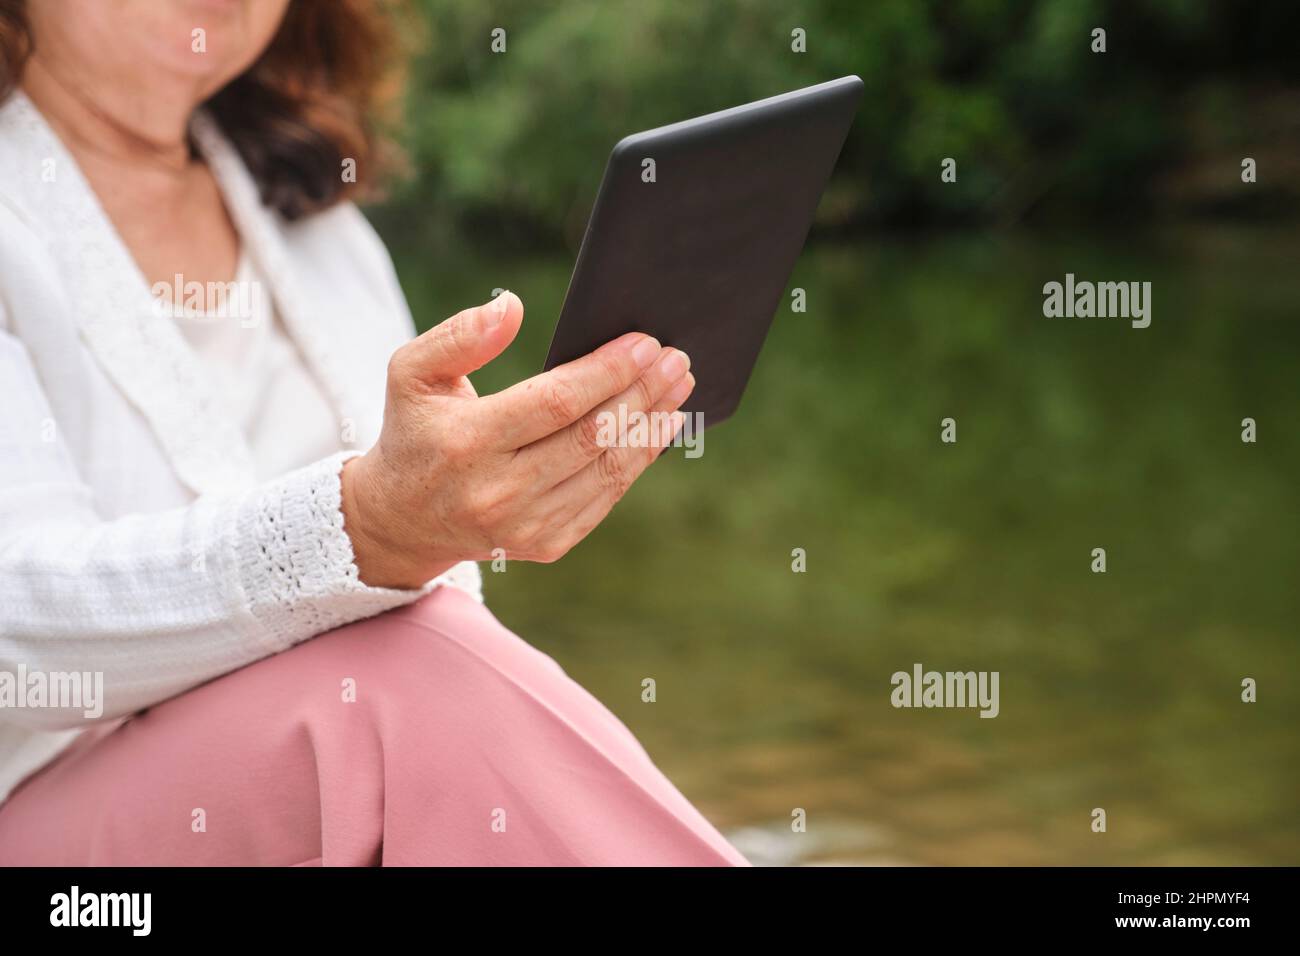 Unrecognizable mature woman reading an ebook on an electronic reader sitting by a lake in a park. Concepts: technology and reading. Image with copy sp Stock Photo